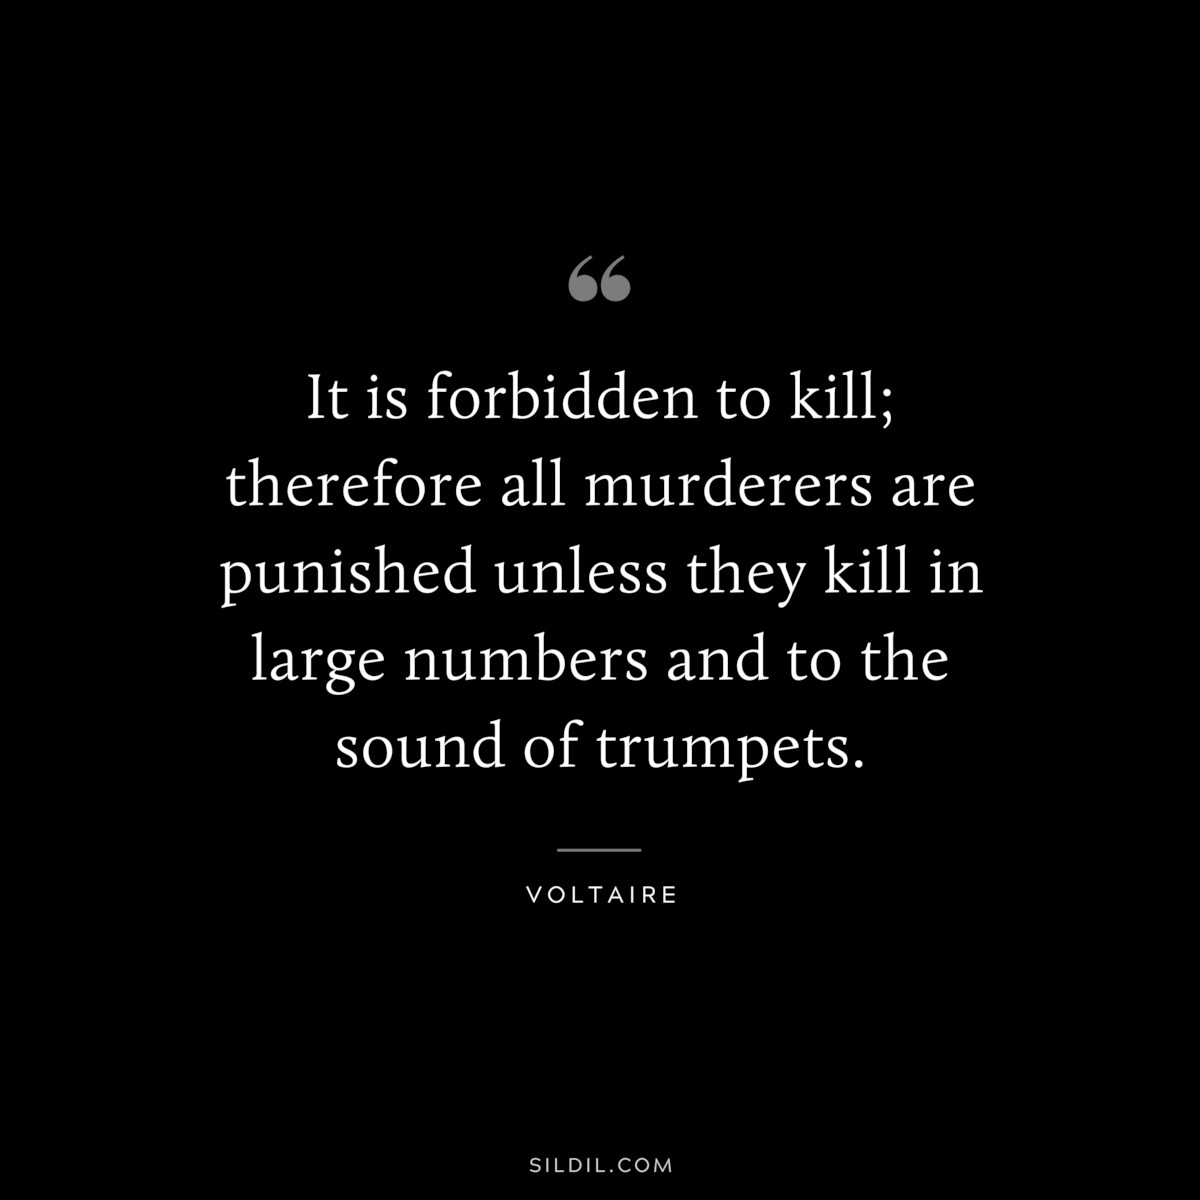 It is forbidden to kill; therefore all murderers are punished unless they kill in large numbers and to the sound of trumpets. ― Voltaire